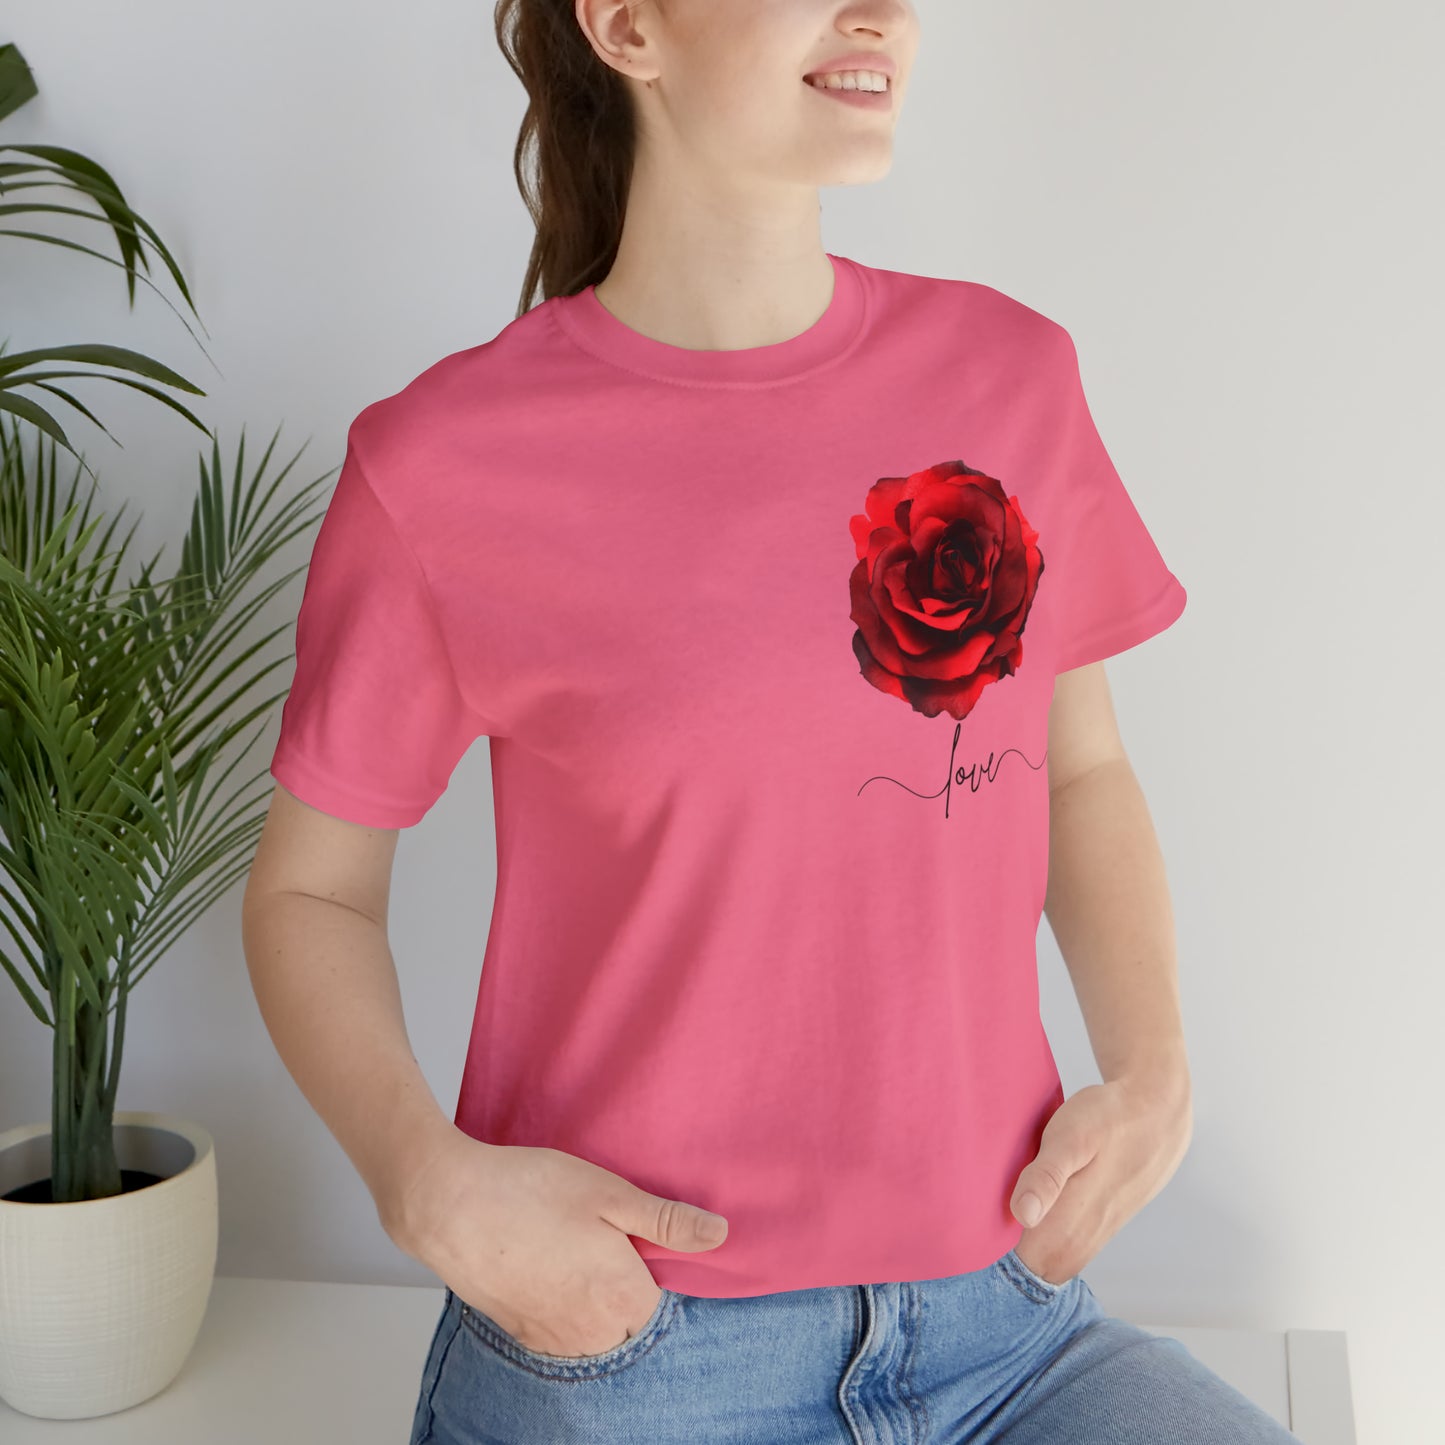 Love Rose Flower shirt, Floral motif, Floral shirt, Engagement gift, Anniversary gift, Wedding gift, gift for Wife, gift for Mom